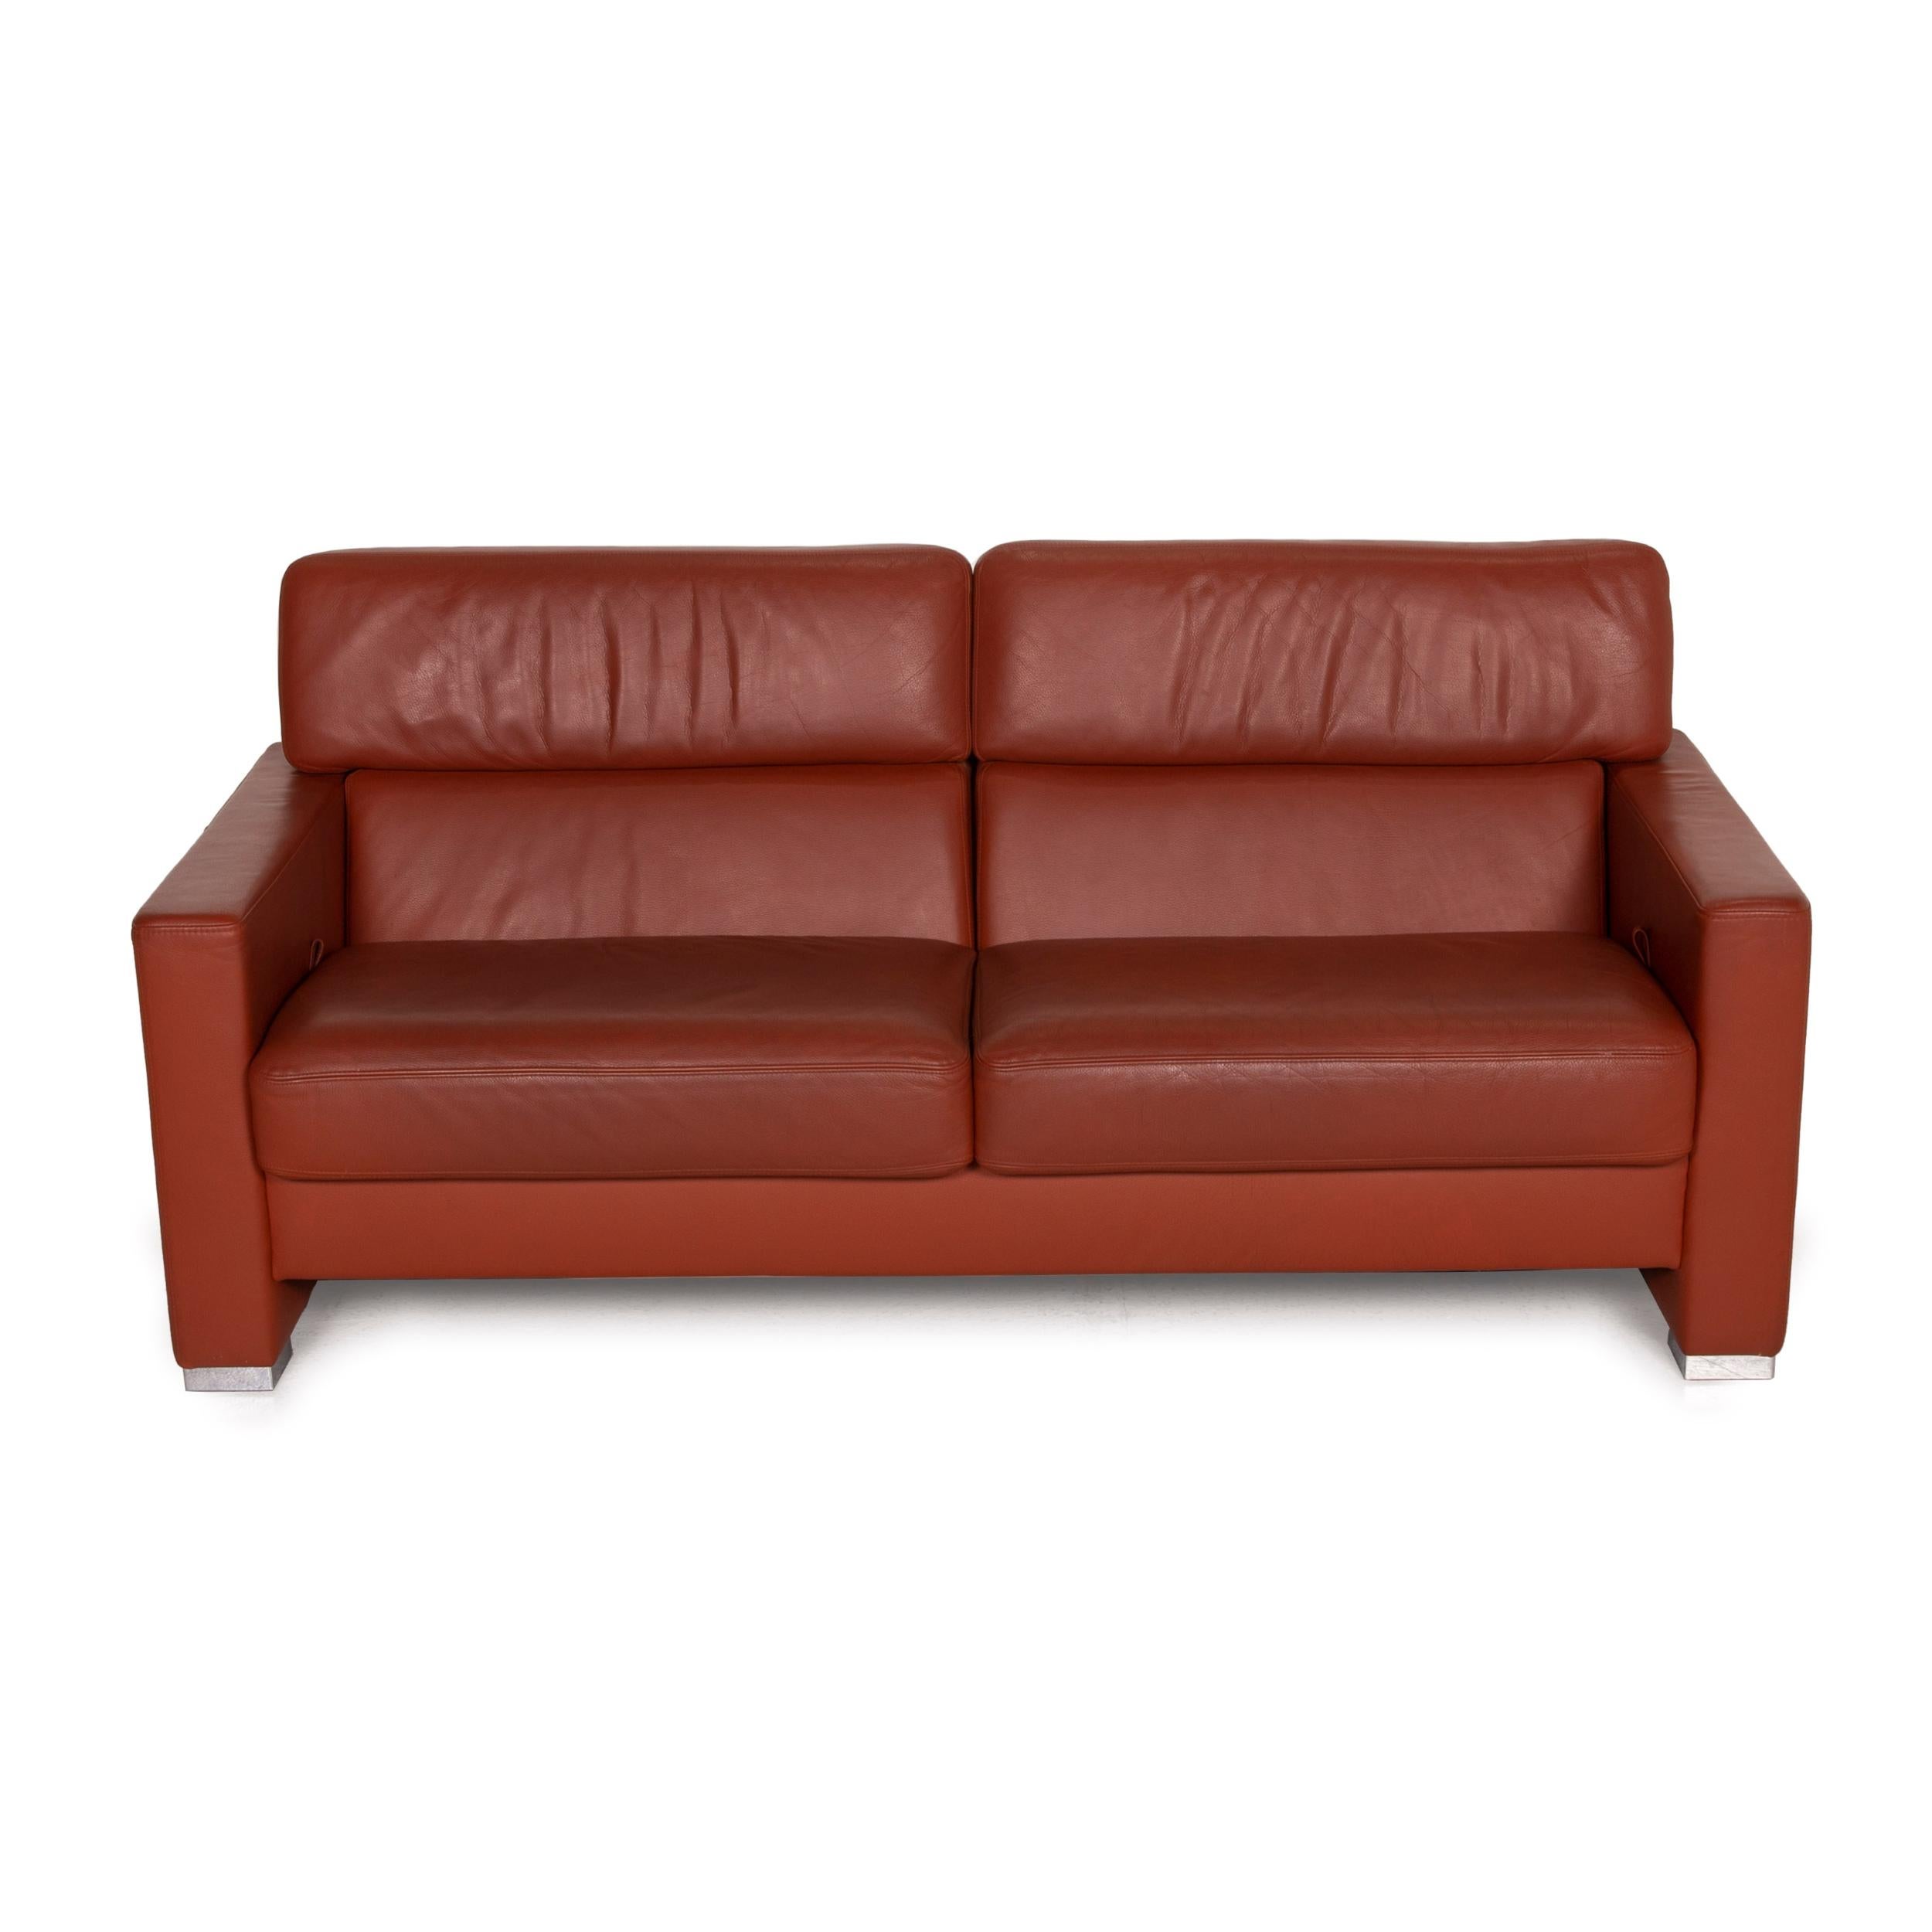 Brühl Collection Separe Leather Sofa Terracotta Three-Seater Function For Sale 3